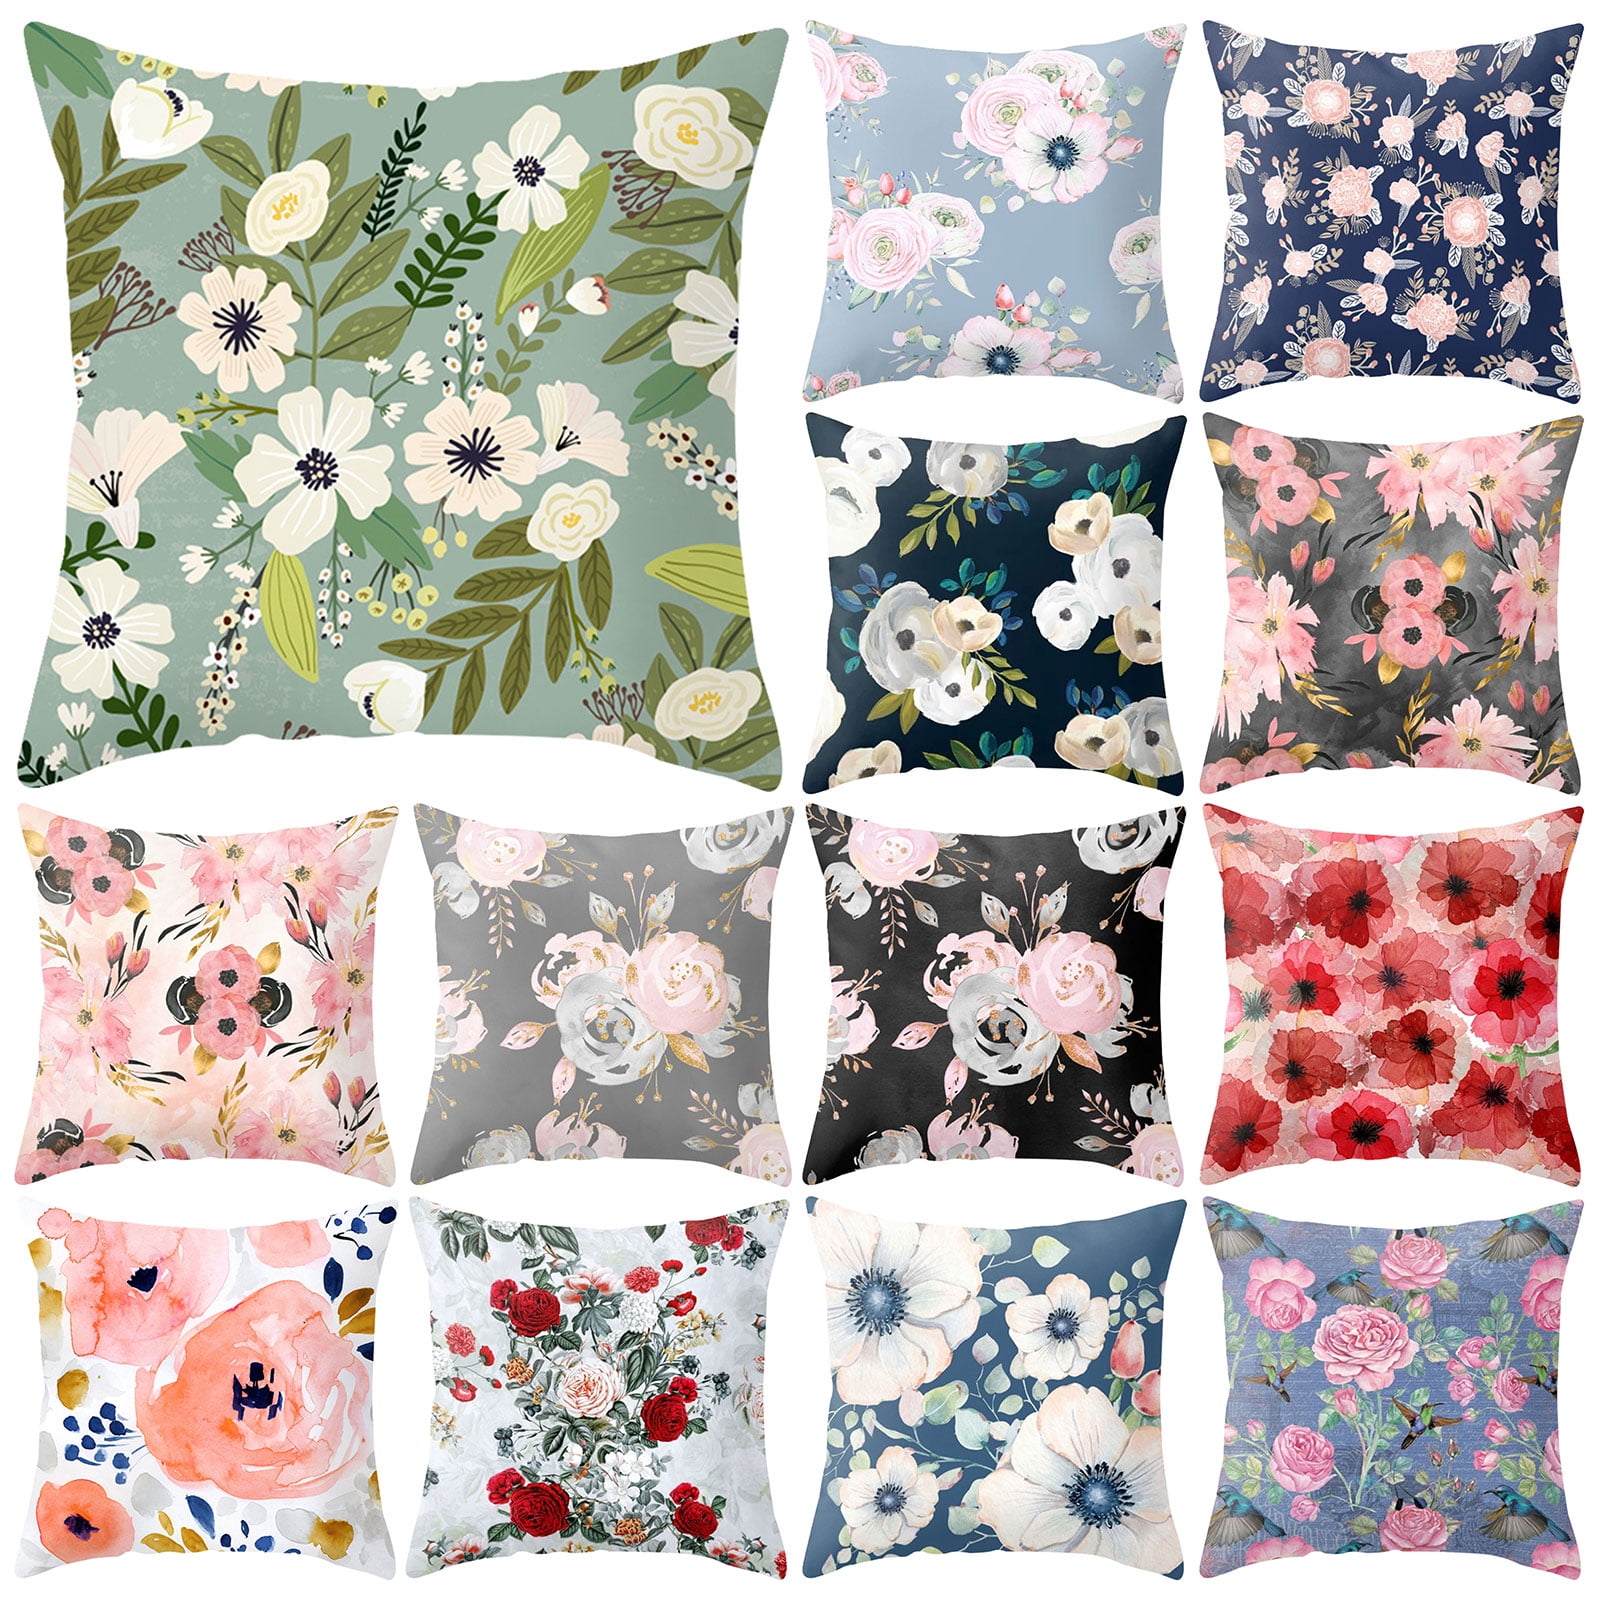 Details about   Geometric Floral Waist Pillow Case Square Throw Cushion Cover Home Bedroom Decor